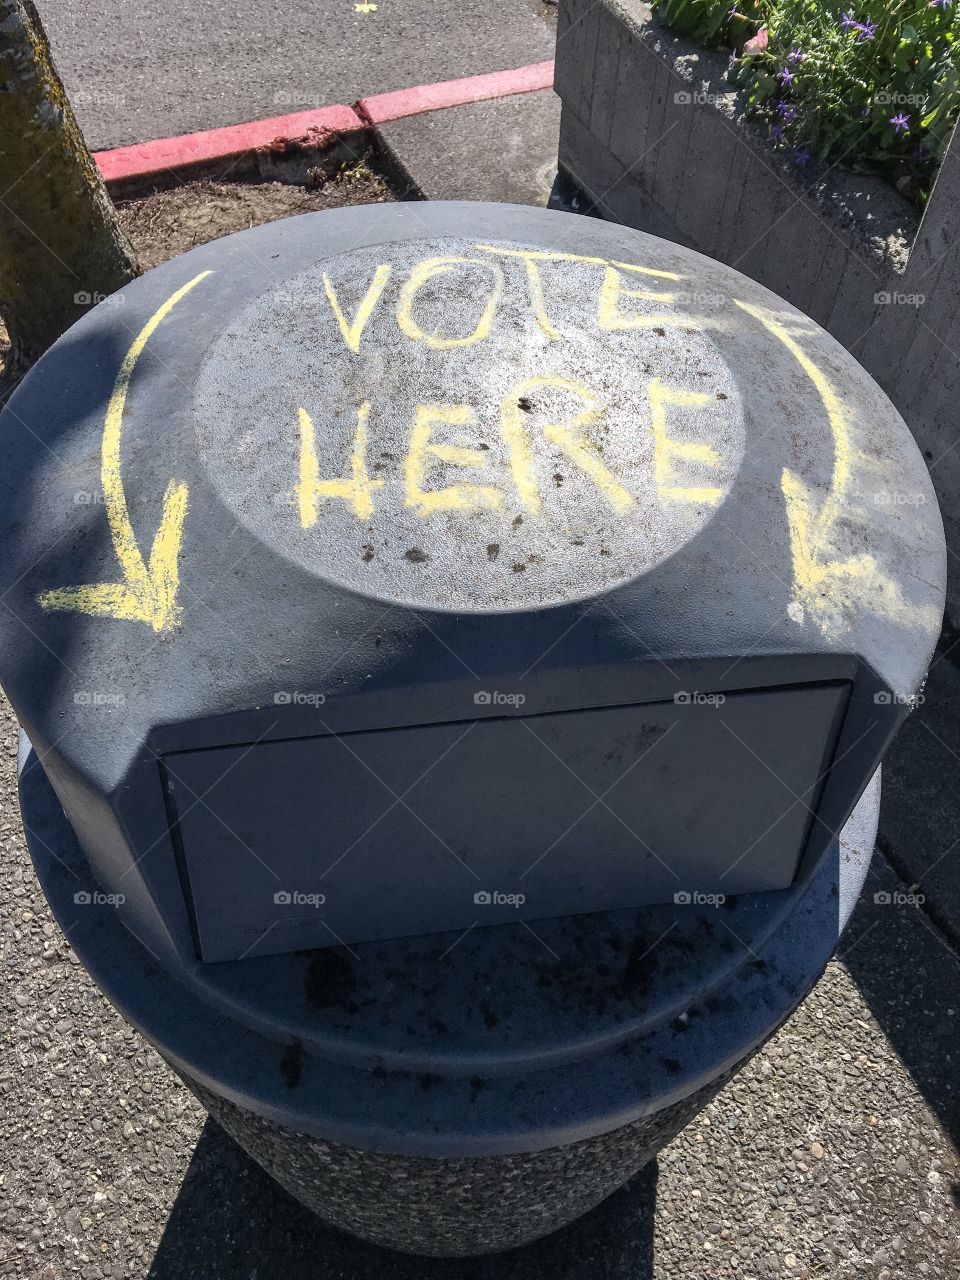 Graffitied garbage can express the frustrations felt by many in regards to the upcoming presidential election.